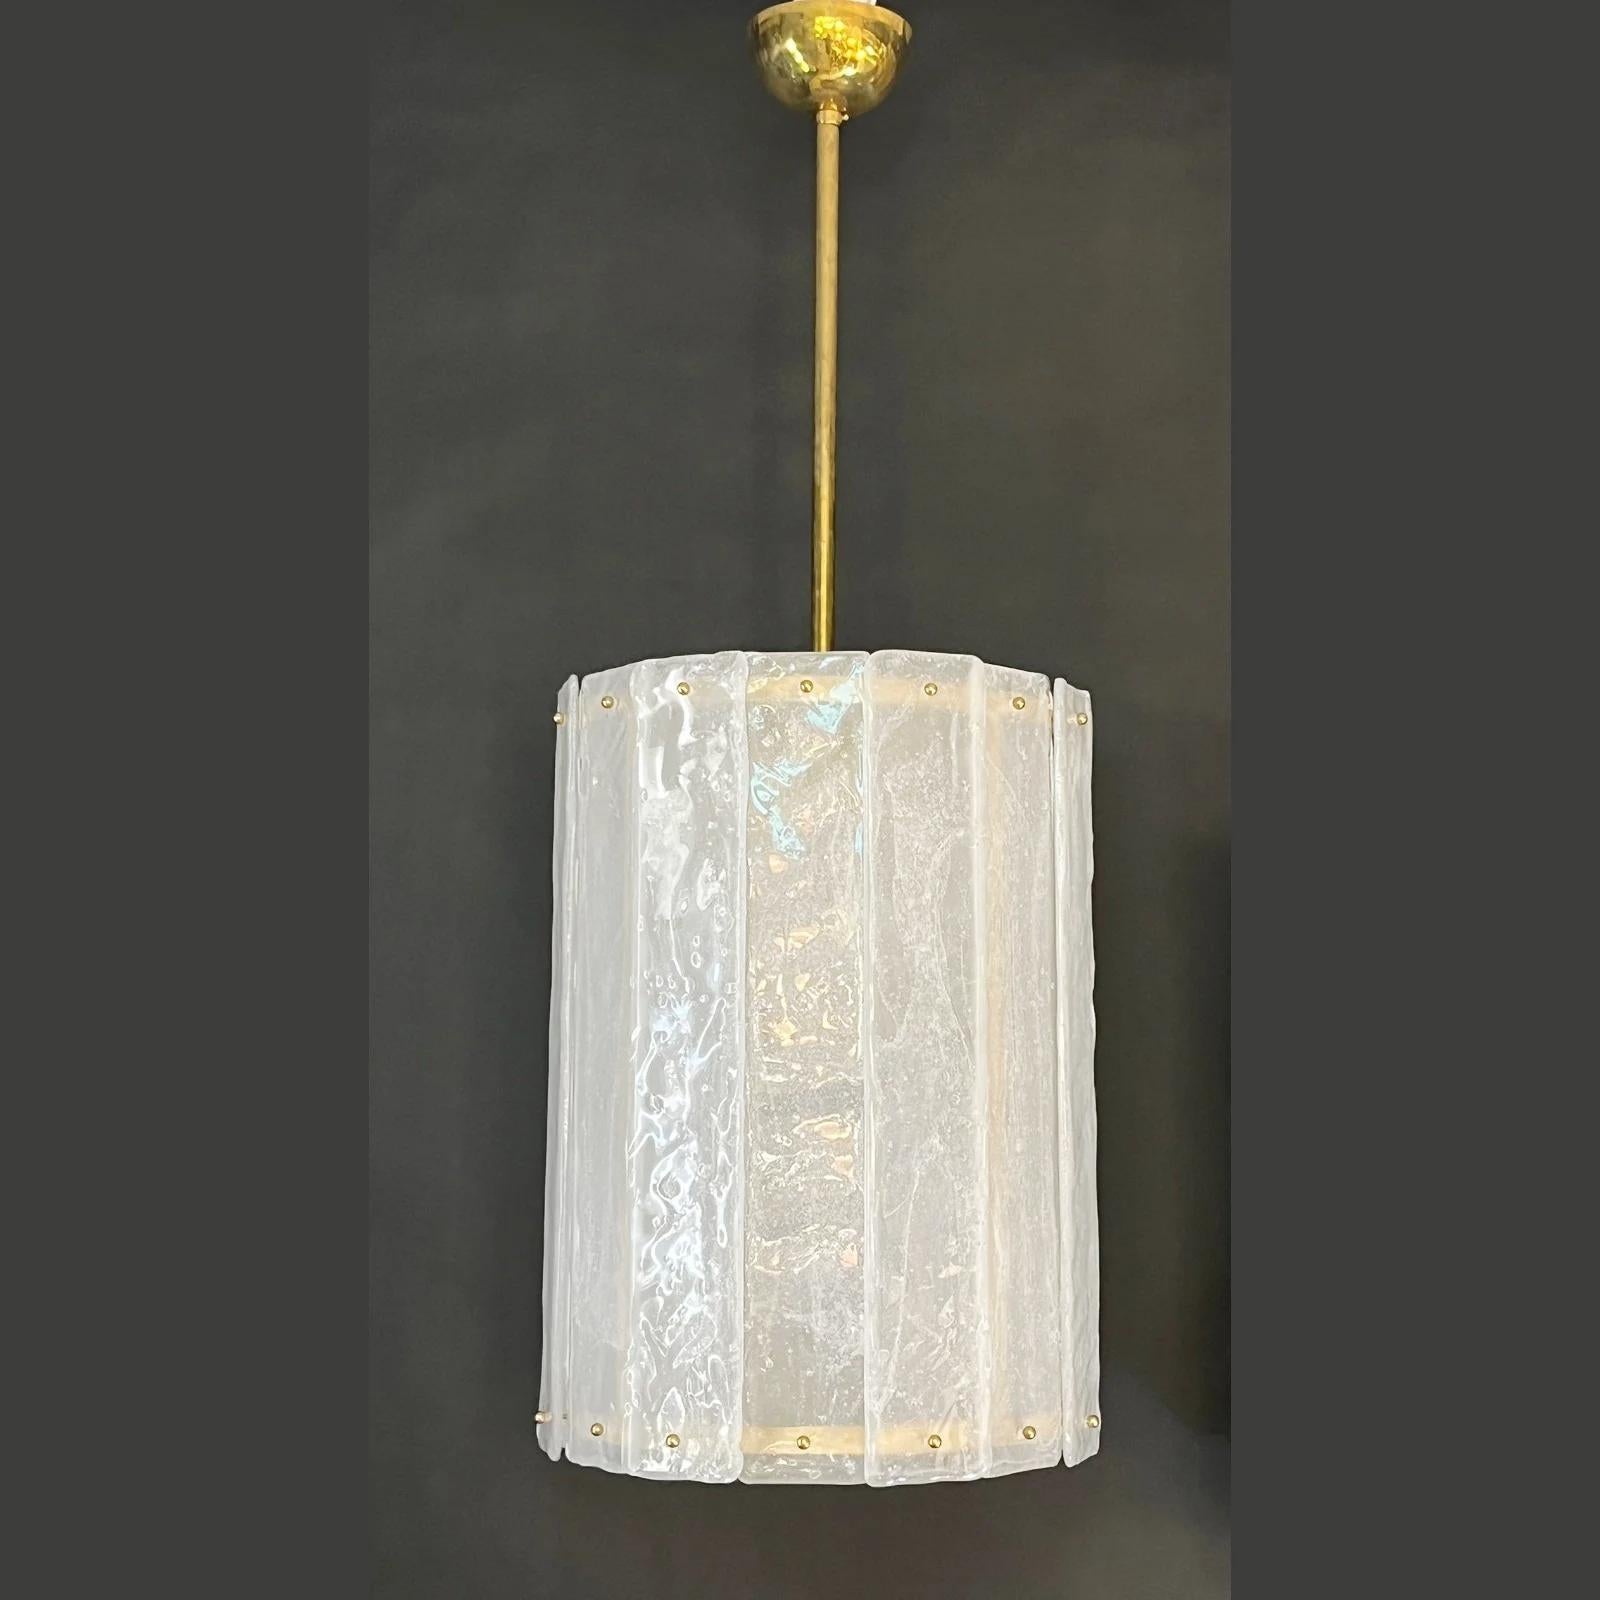 Unique contemporary Italian Art Deco design round pendant chandelier, entirely handcrafted. This light fixture is composed of a handmade brass structure supporting overlapping Murano glass bands, the frosted crystal  worked with bubbles in the glass